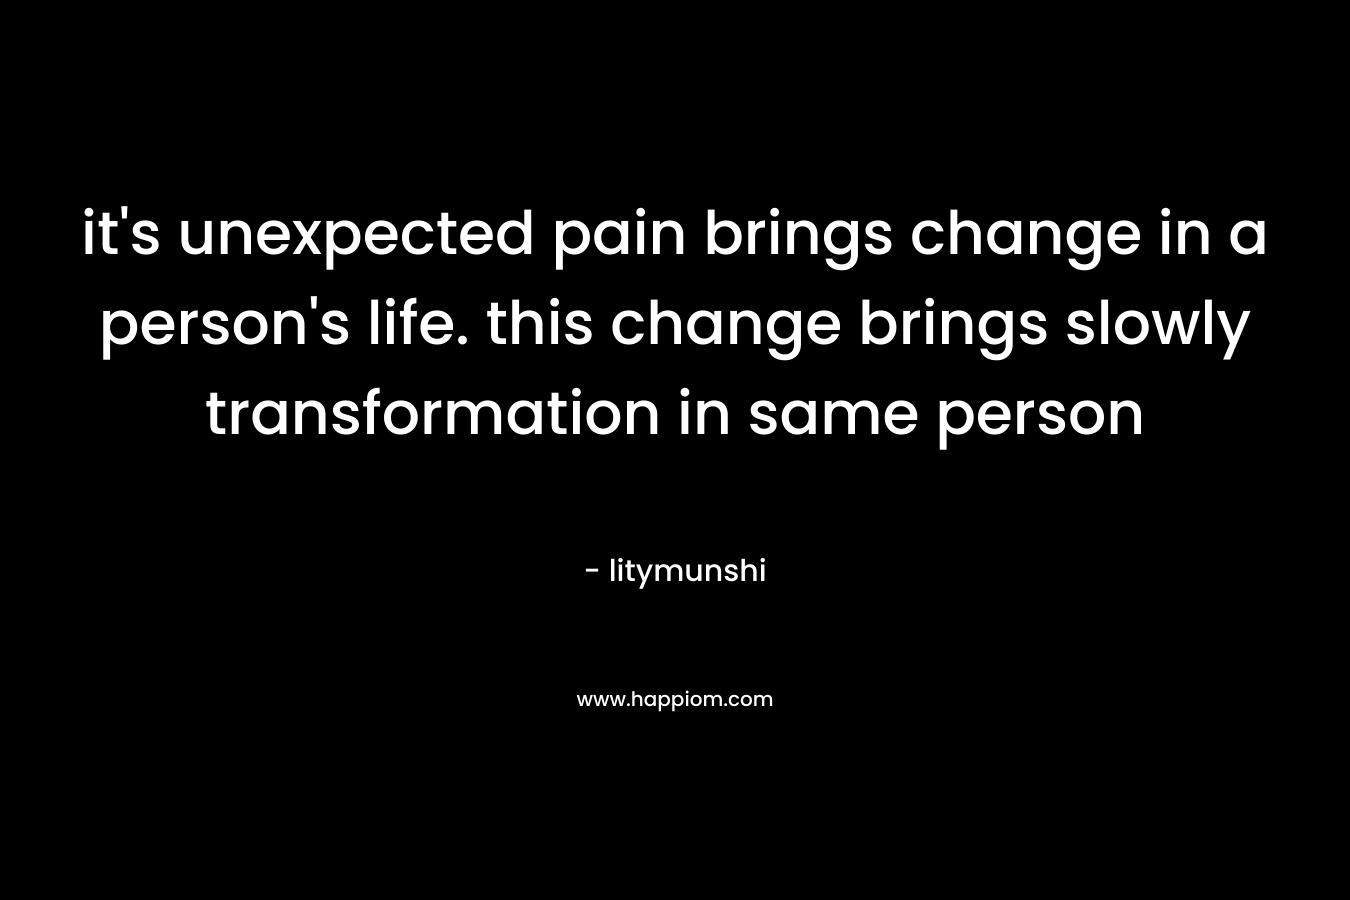 it's unexpected pain brings change in a person's life. this change brings slowly transformation in same person